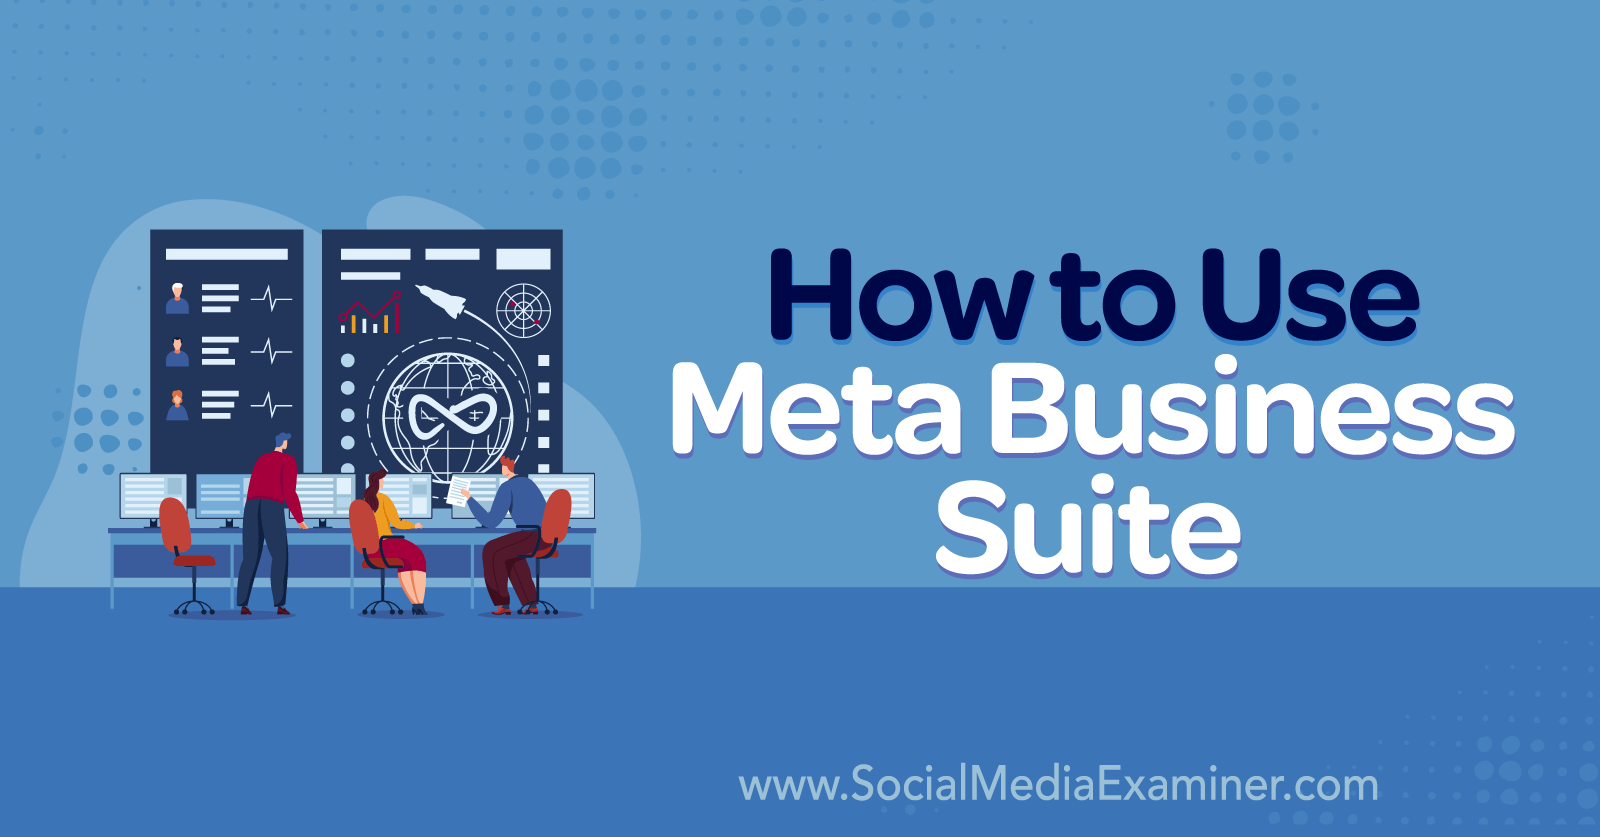 How to Use Meta Business Suite Social Media Examiner